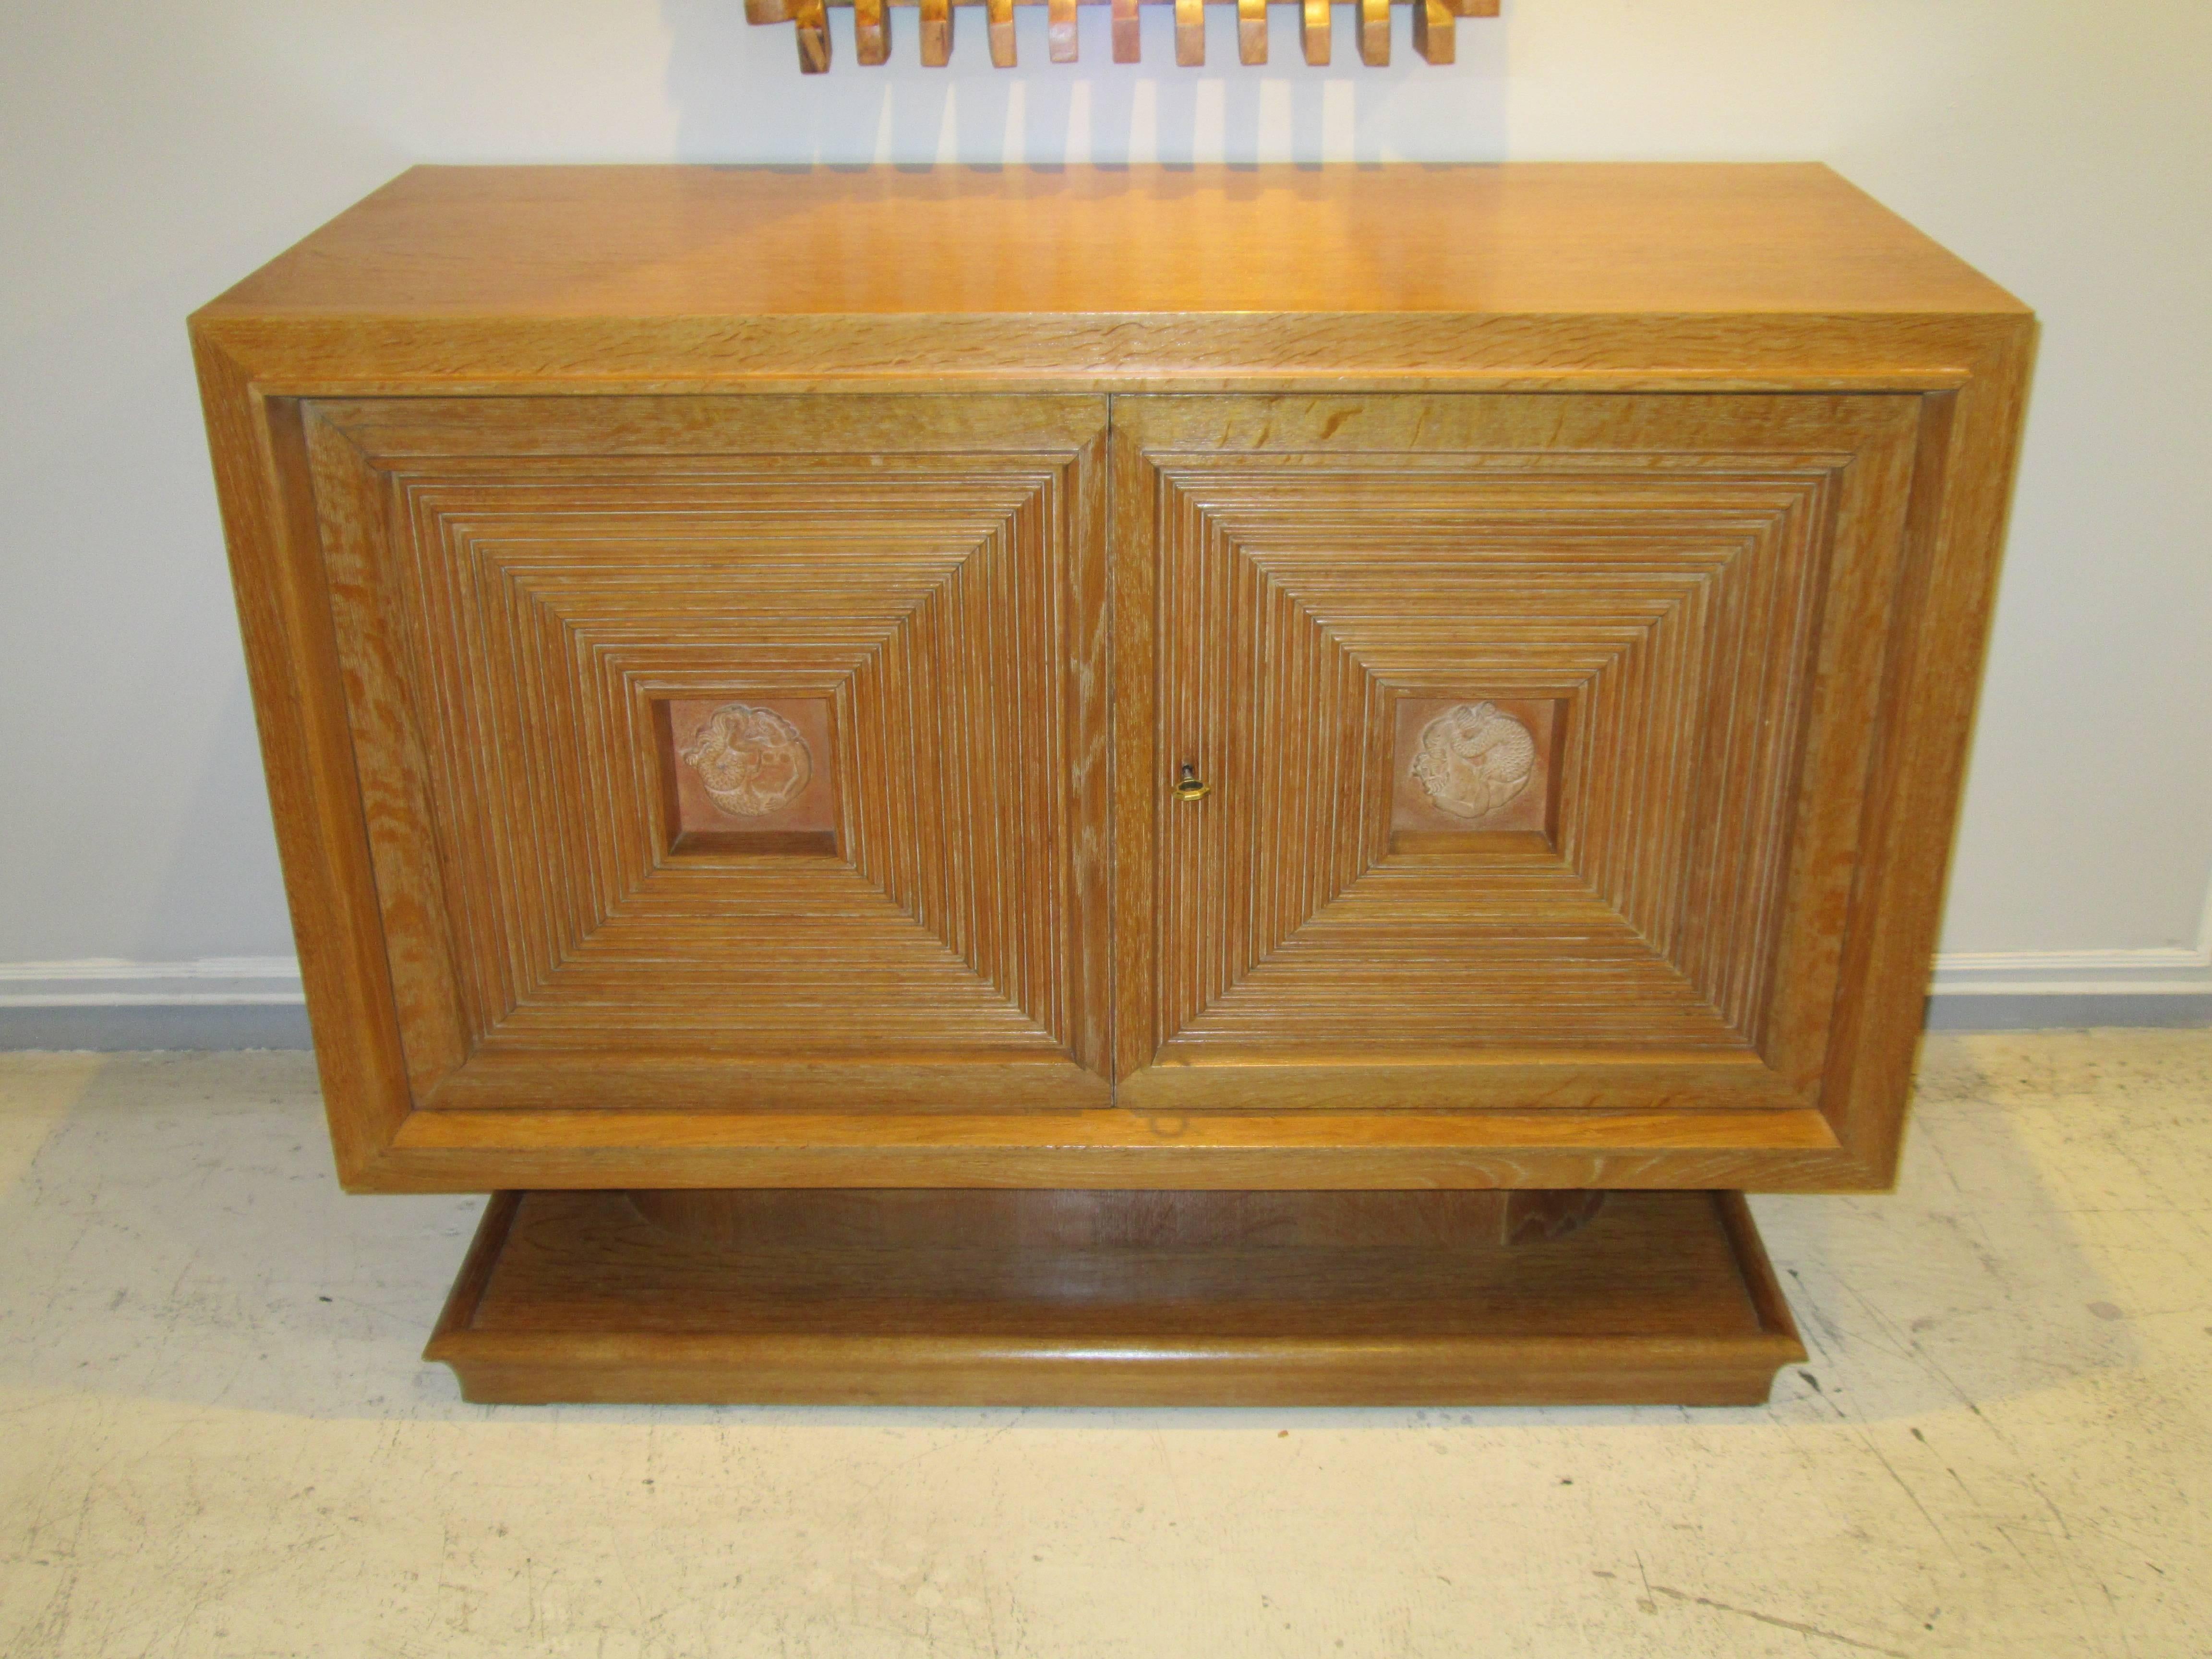 Sculptural  Cerused-Oak Sideboard attributed to Maxime Old  With Two Central Doors Each Featuring Central Ceramic Plaques on a Plinth Base

Maxime Old was born December 13, 1910 in Maisons-Alfort, a suburb of Paris, and was the son and grand-son